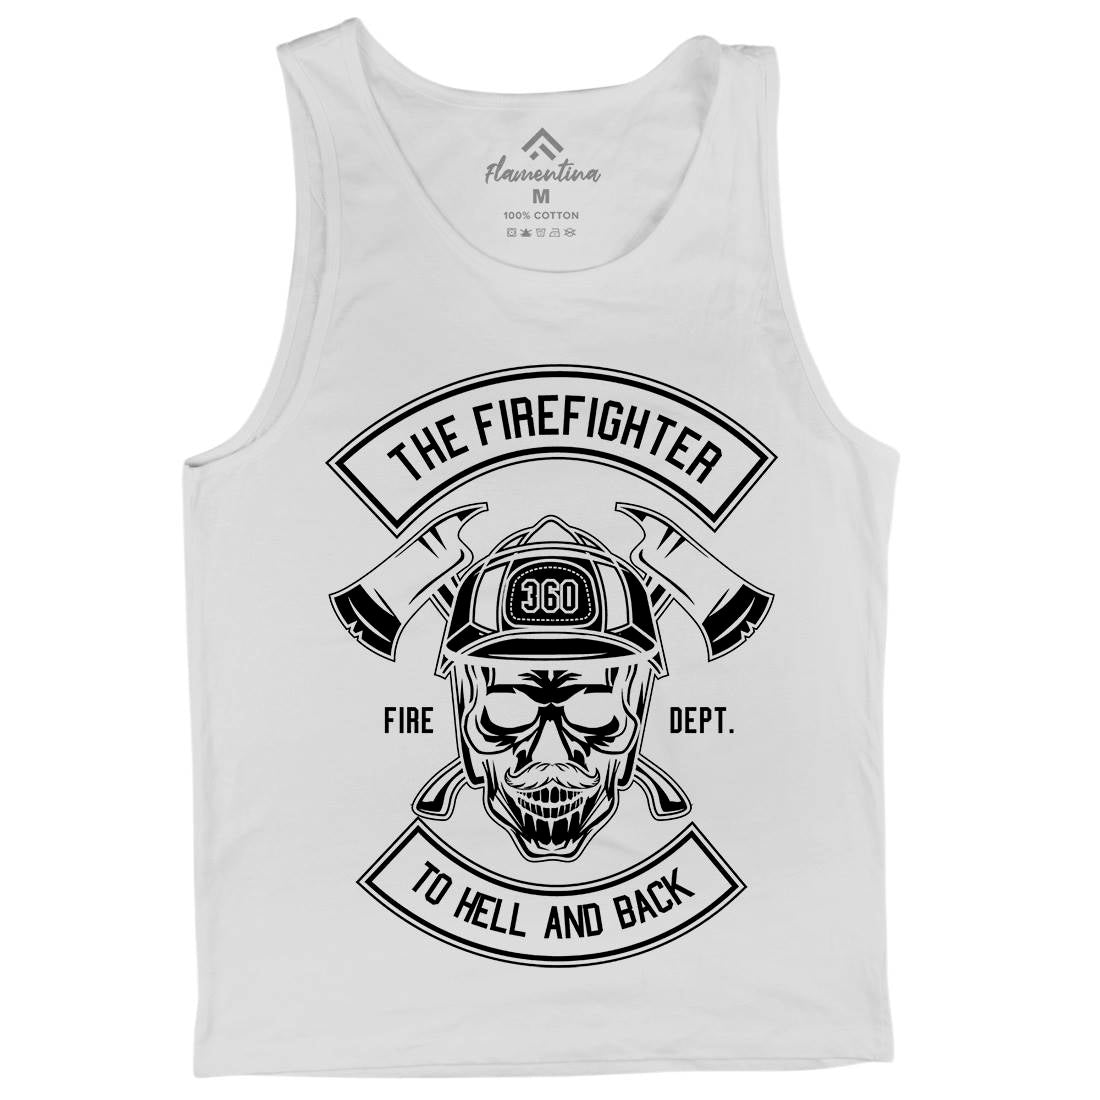 The Fire Fighter Mens Tank Top Vest Firefighters B651